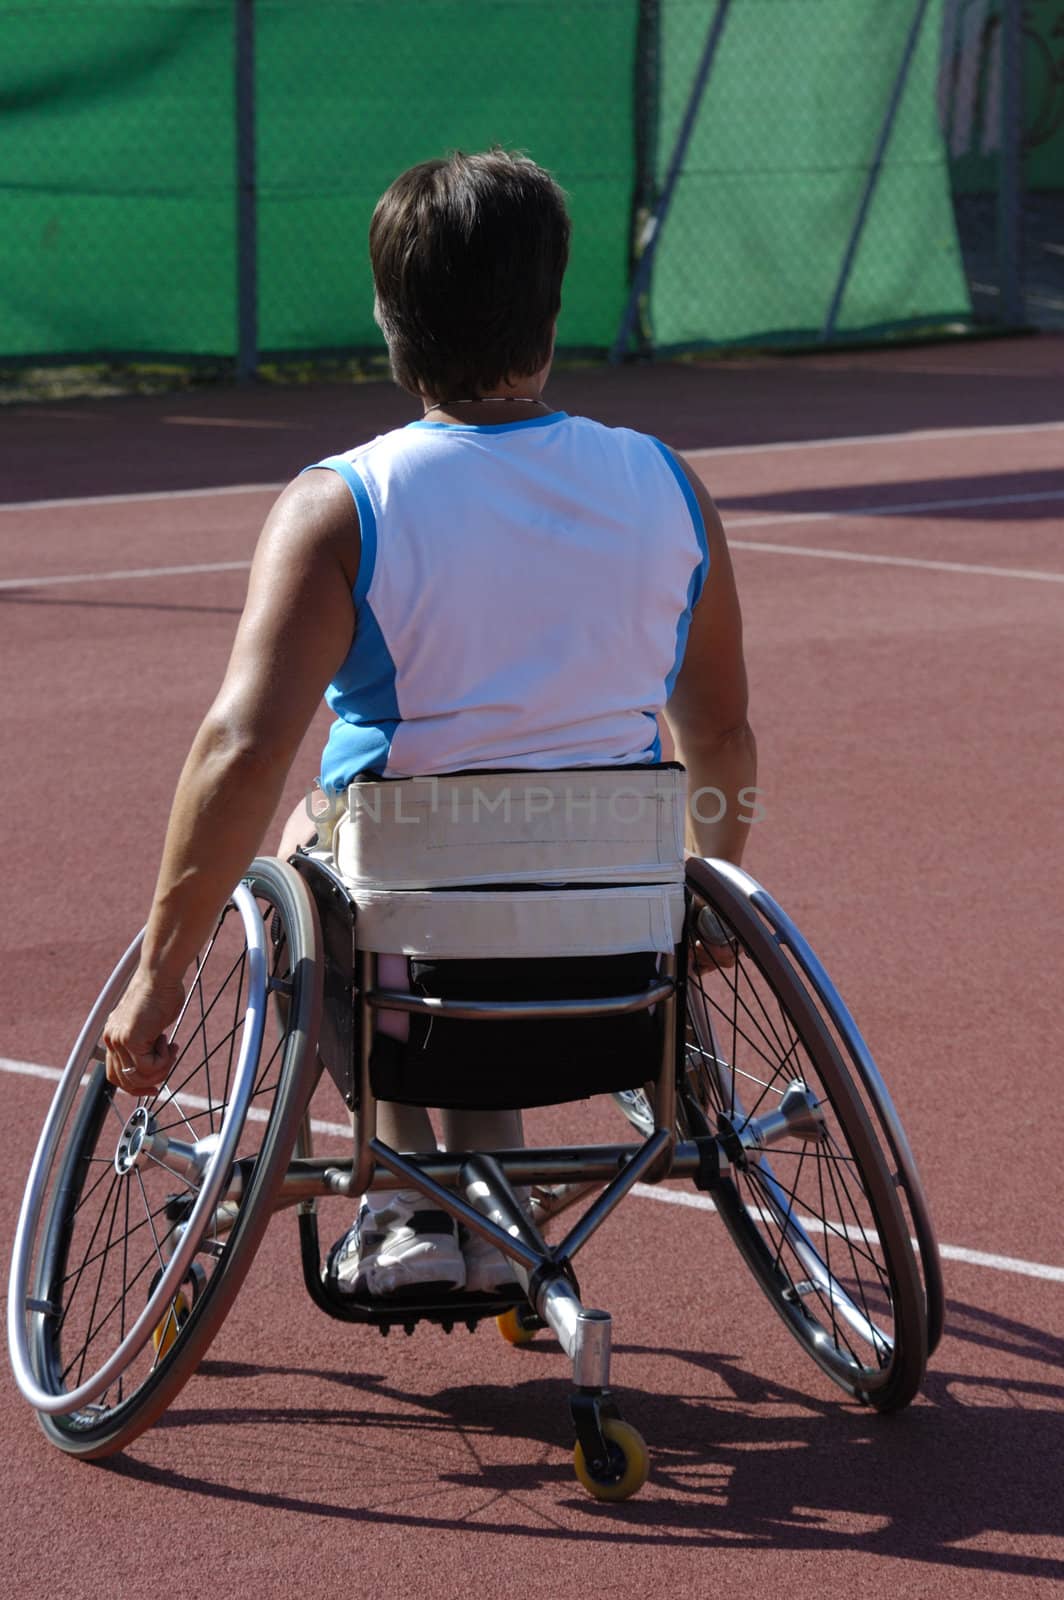 A wheelchair athlete taking a moment's pause during a tennis championship match. Her tennis racquet can just be seen in her right hand and a little sweat on the back of her blouse.